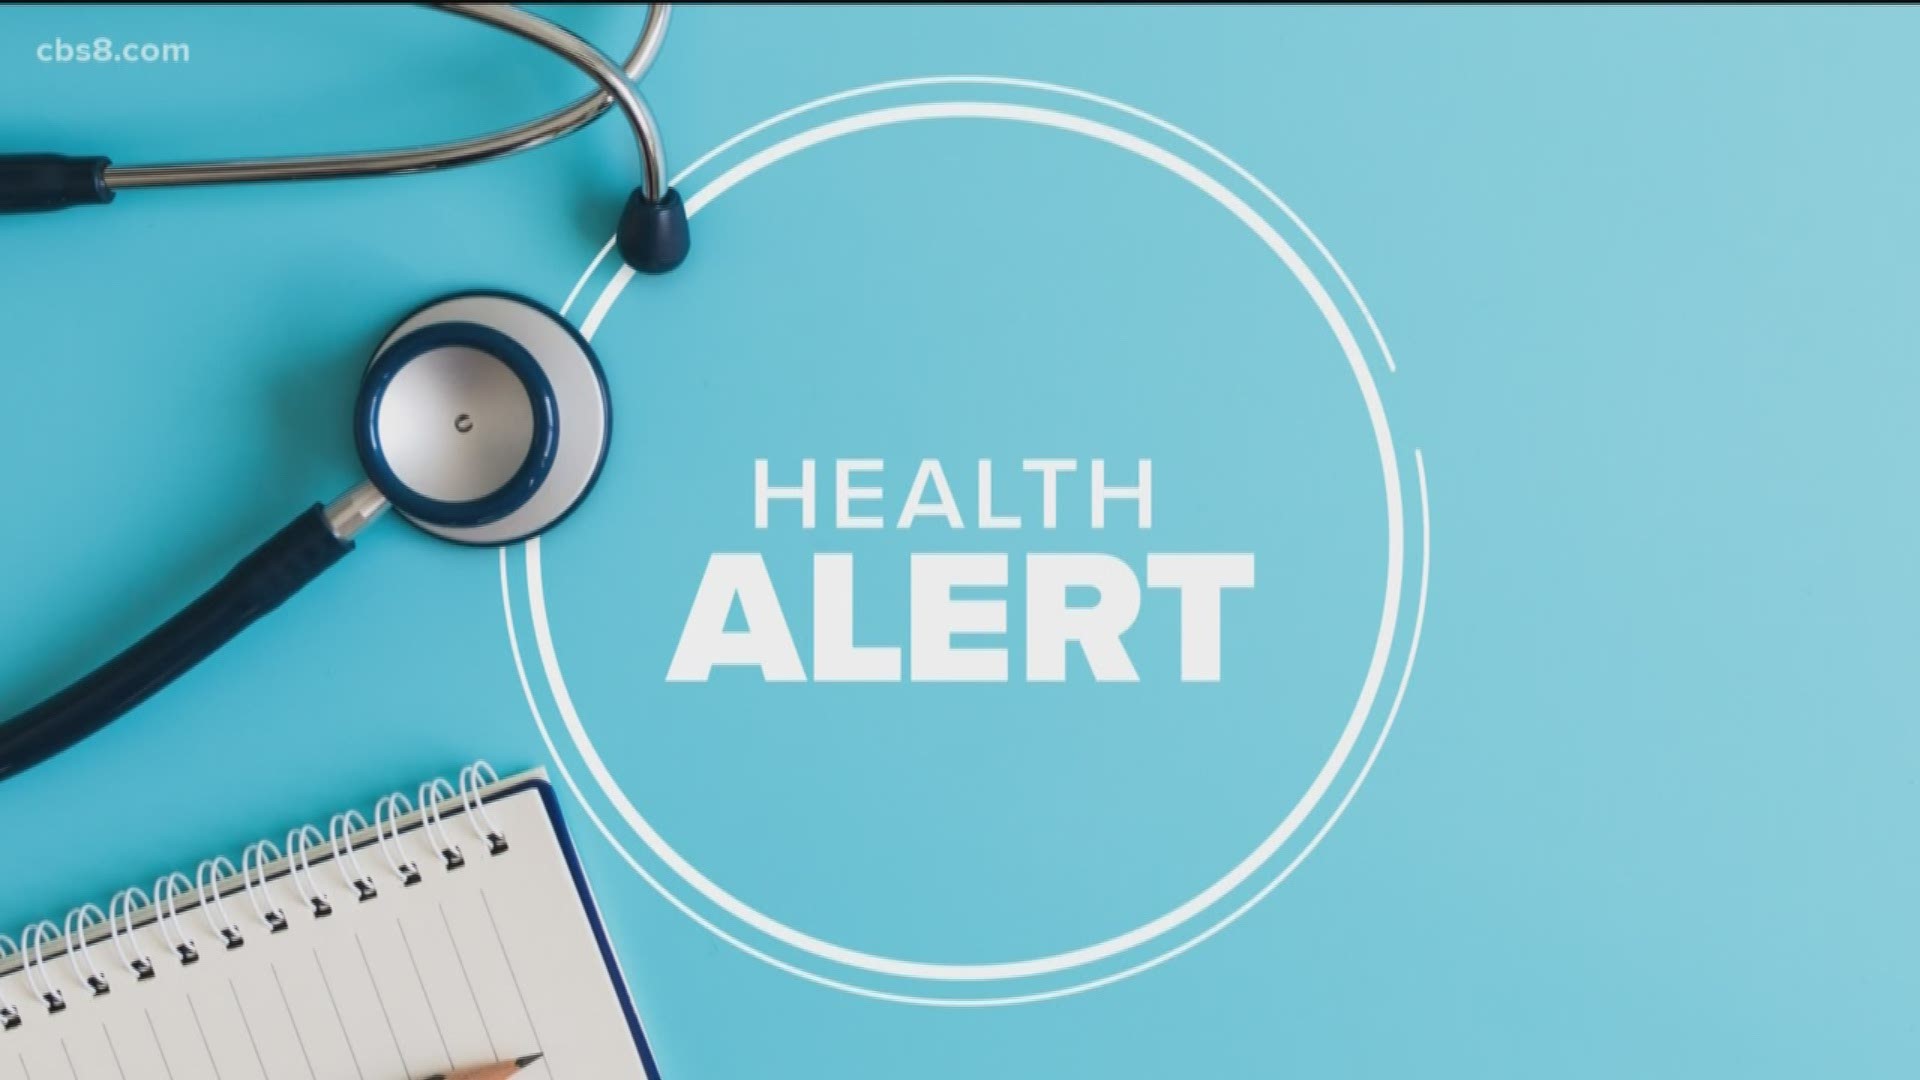 A variety of issues on the San Diego health front this week, and the nurse practitioners at CVS Minute Clinic said that includes the effects of our spring weather stirring up allergens.